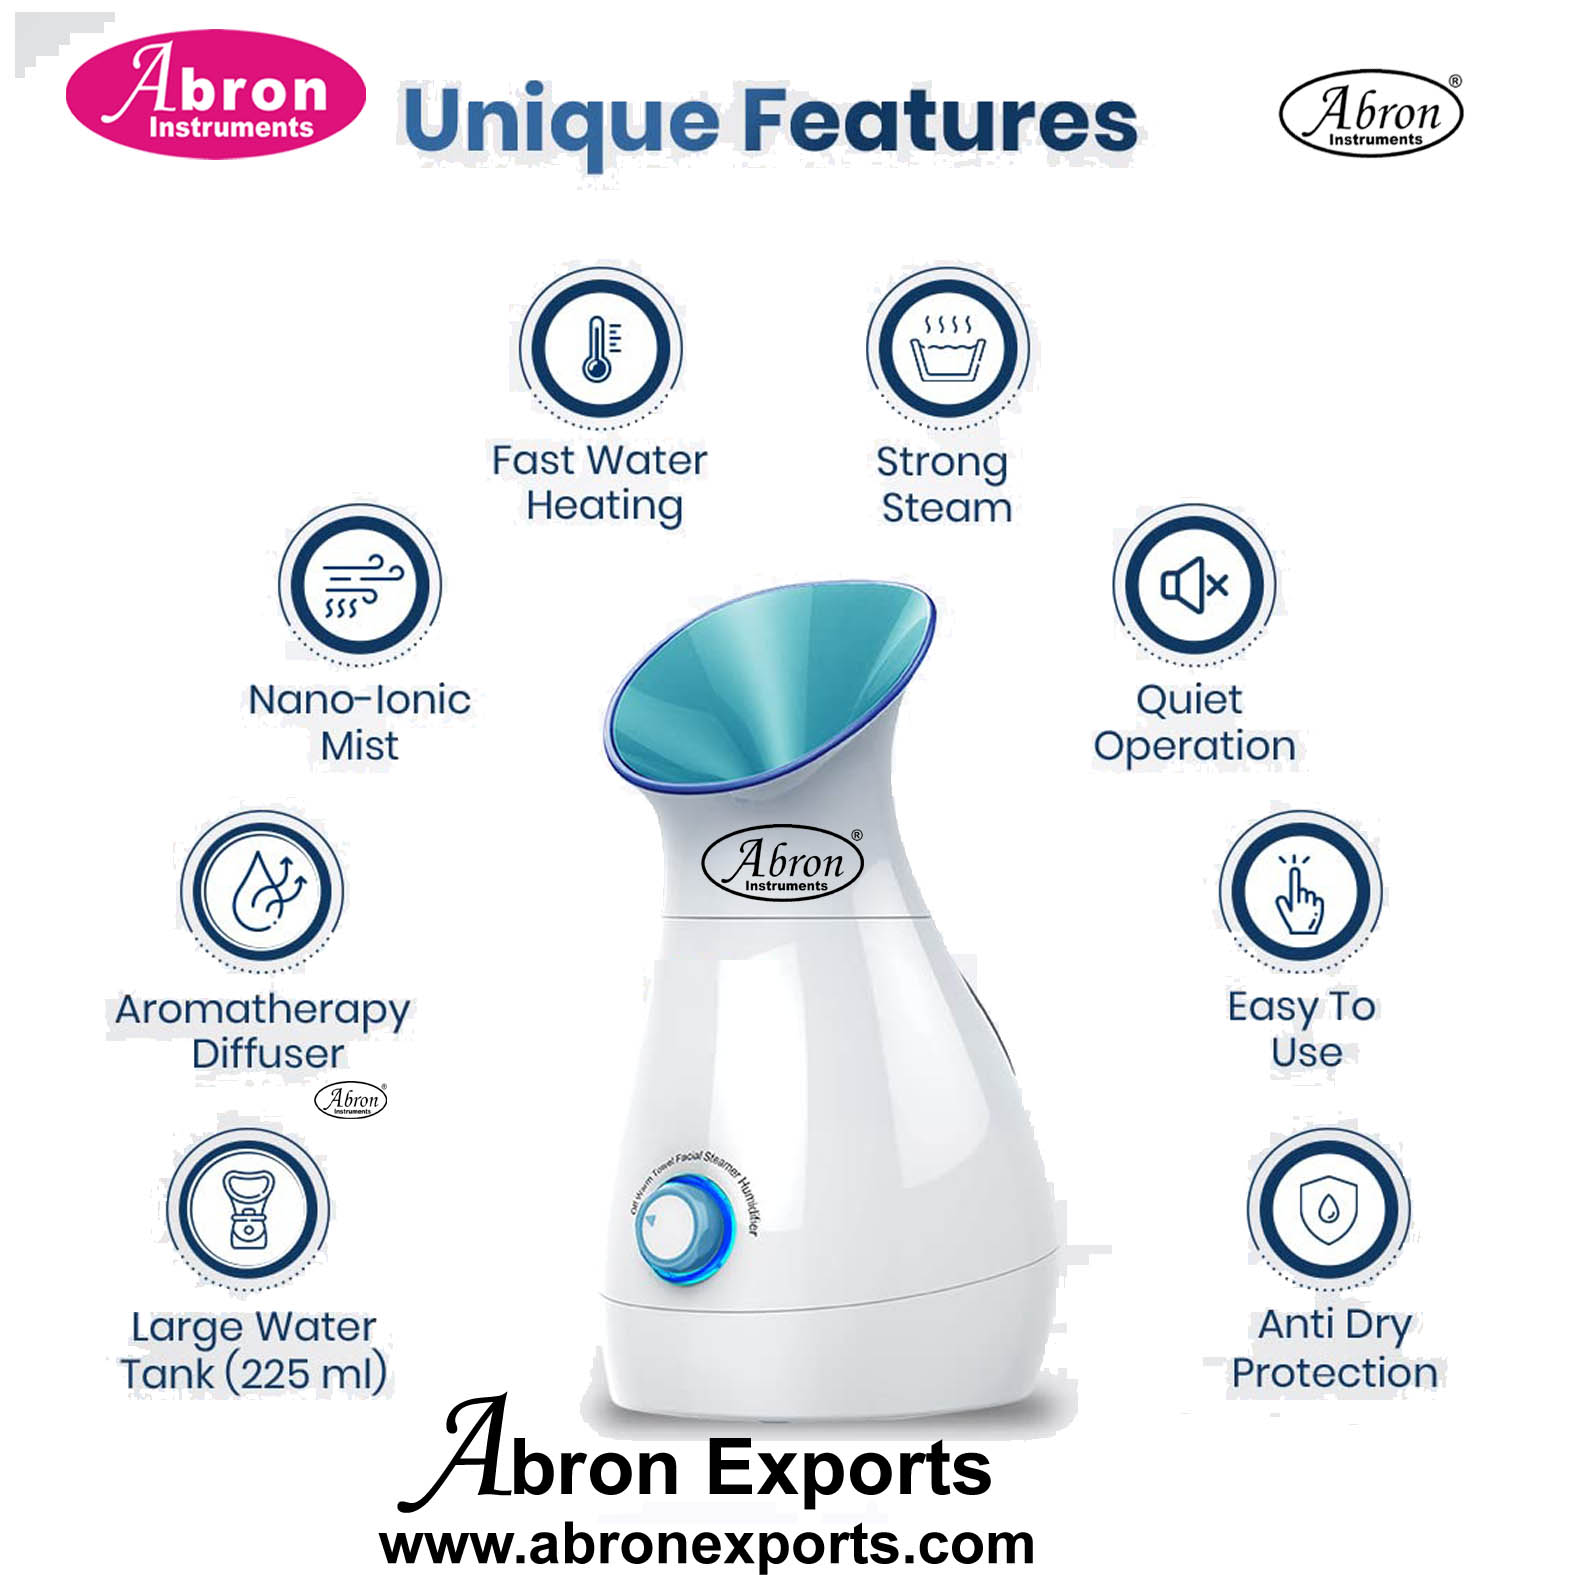 Humidifier steamer vaporizer for Room asthma towel wetting 200ml small tabletop portable for Room Office works Abron ABM-2946HS